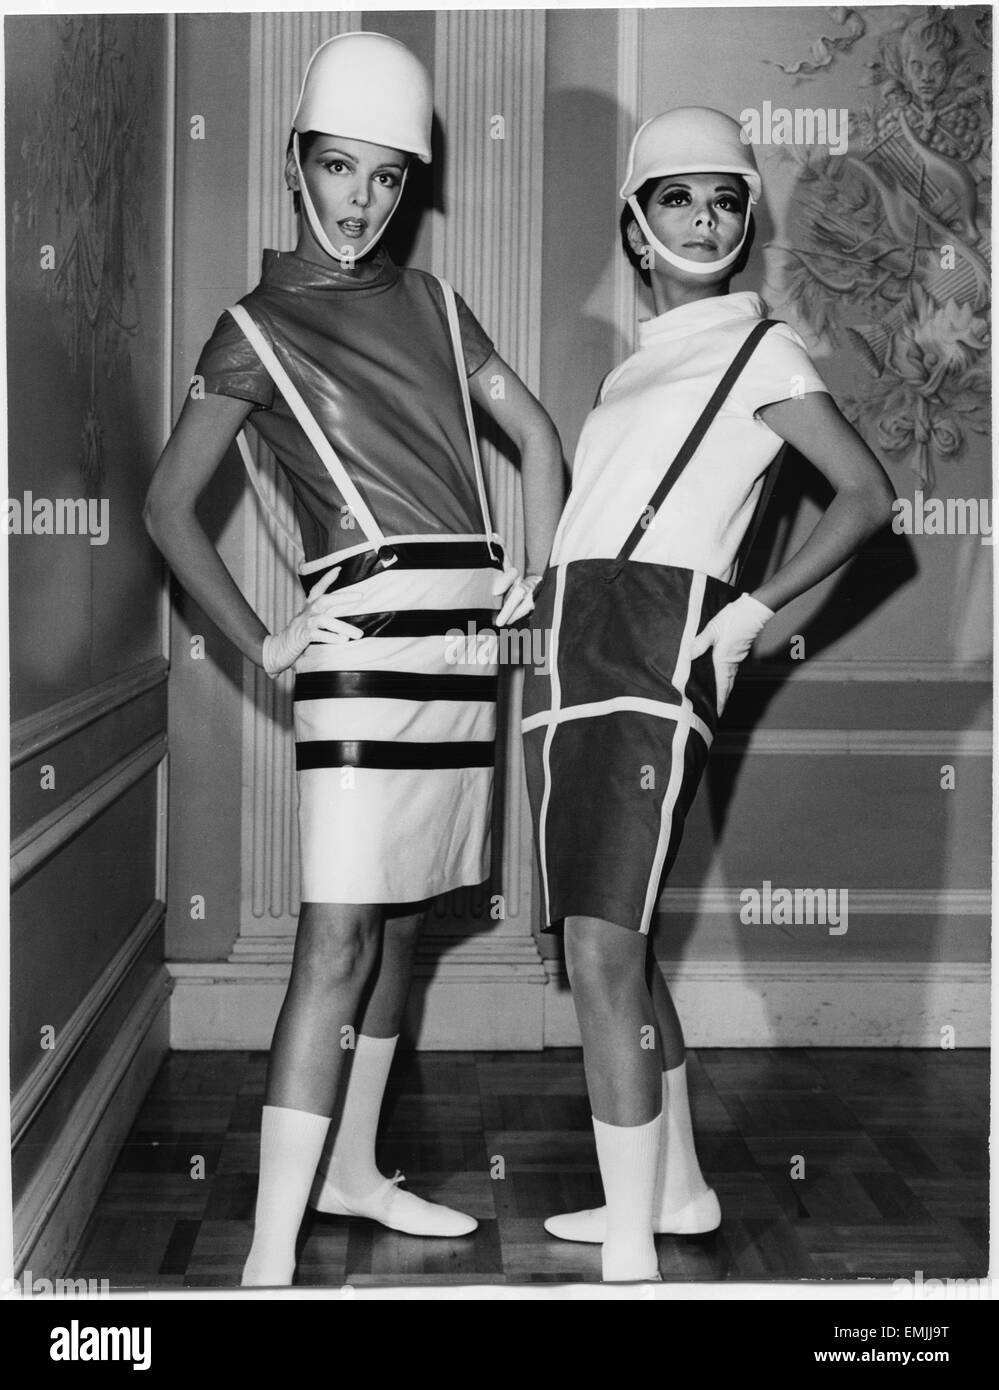 Two Fashion Models Wearing Sleek Interpretations of Andre Courreges’ Suspender Outfits Featuring Barrel Skirts with Button-Attached Suspenders and Leather Cowl-Neck Blouses, Presented by Samuel Robert, New York City, 1965 Stock Photo